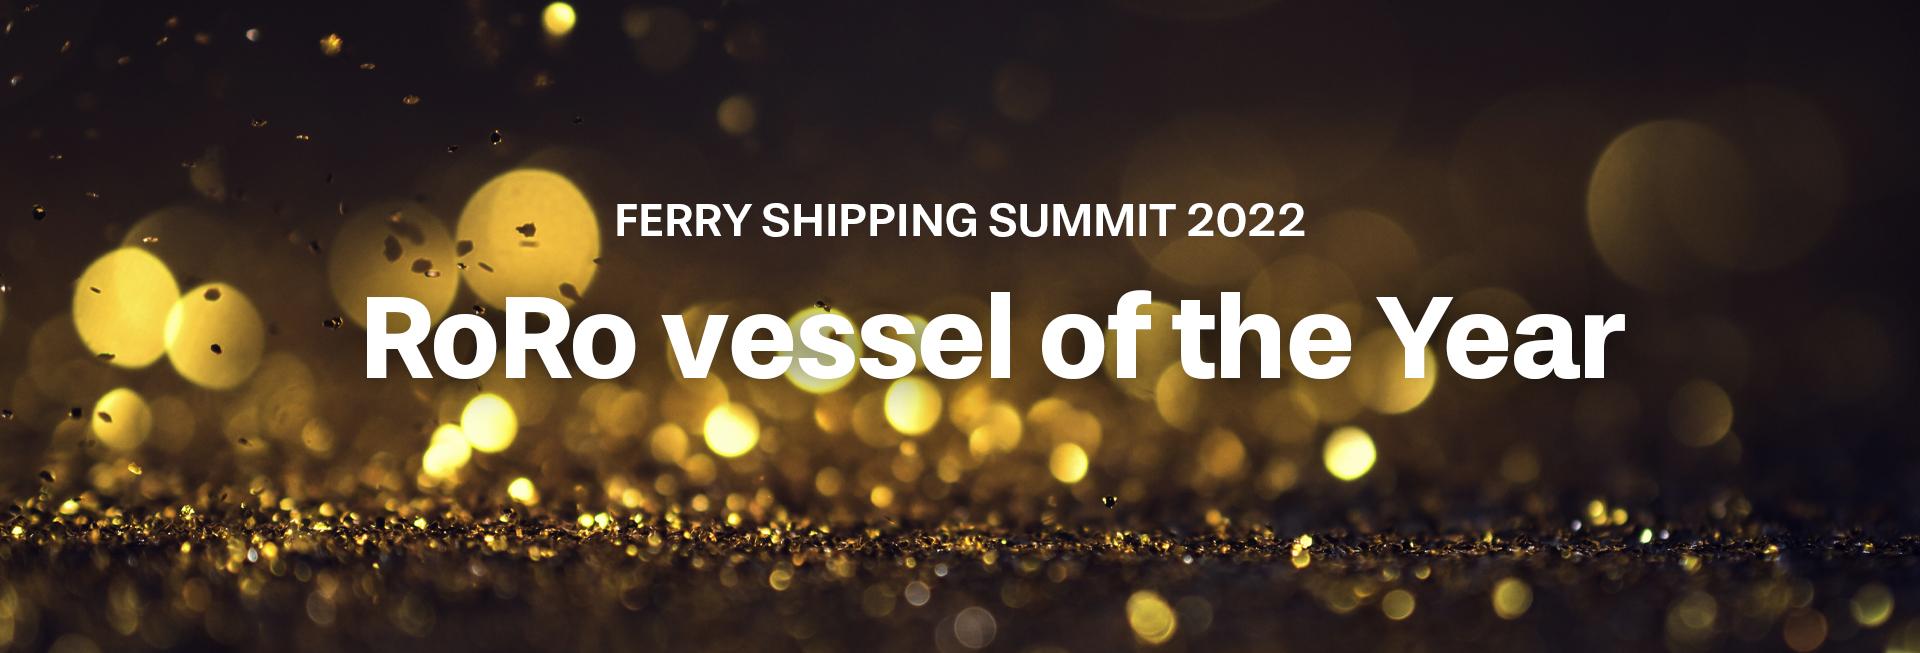 RoRo vessel of the Year 2022